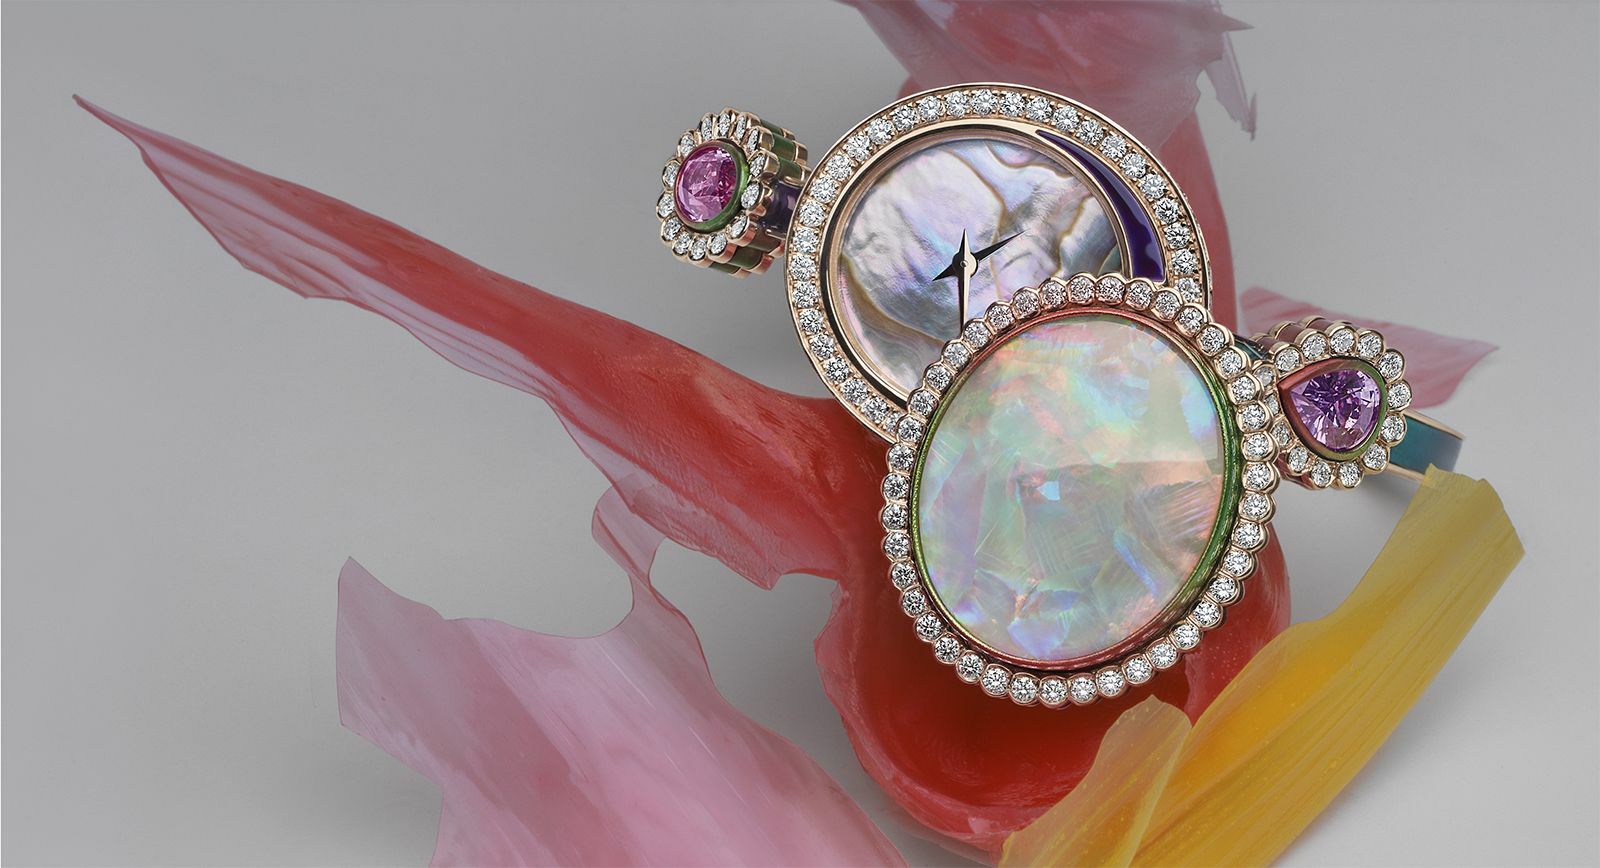 Dior "Dior et Moi" High Jewellery Collection Secret Watch with Opal